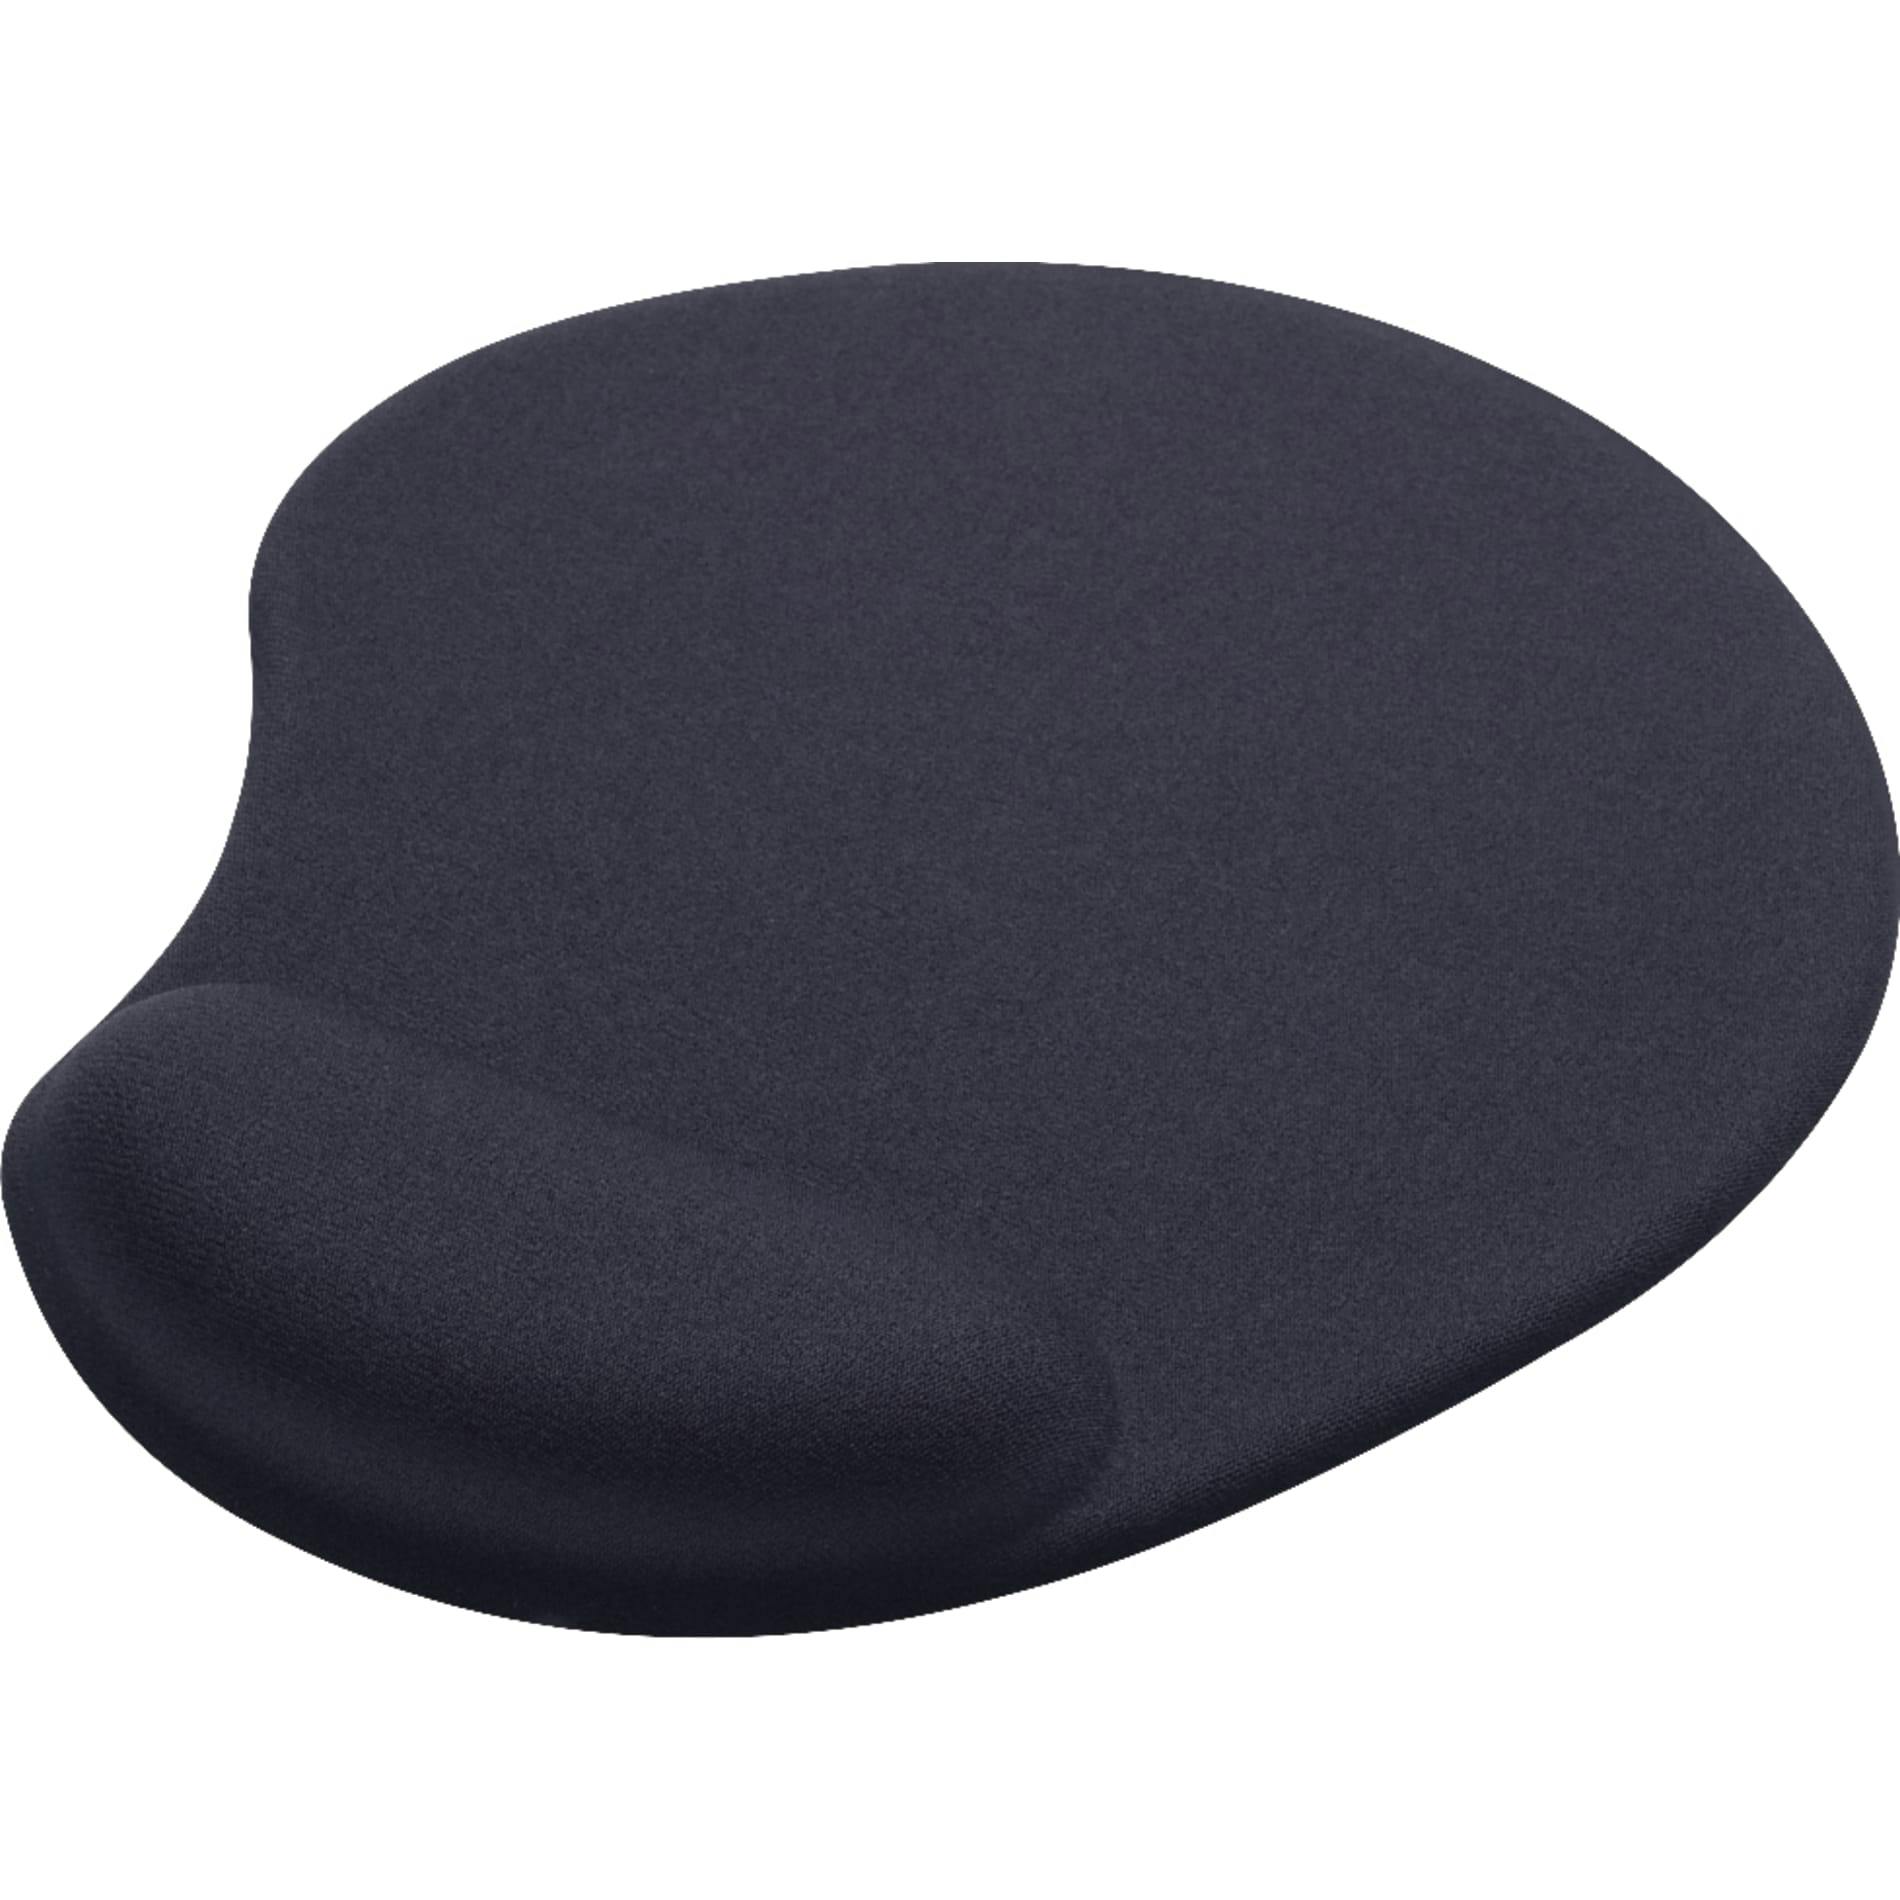 Solid Jersey Gel Mouse Pad / Wrist Rest - additional Image 1